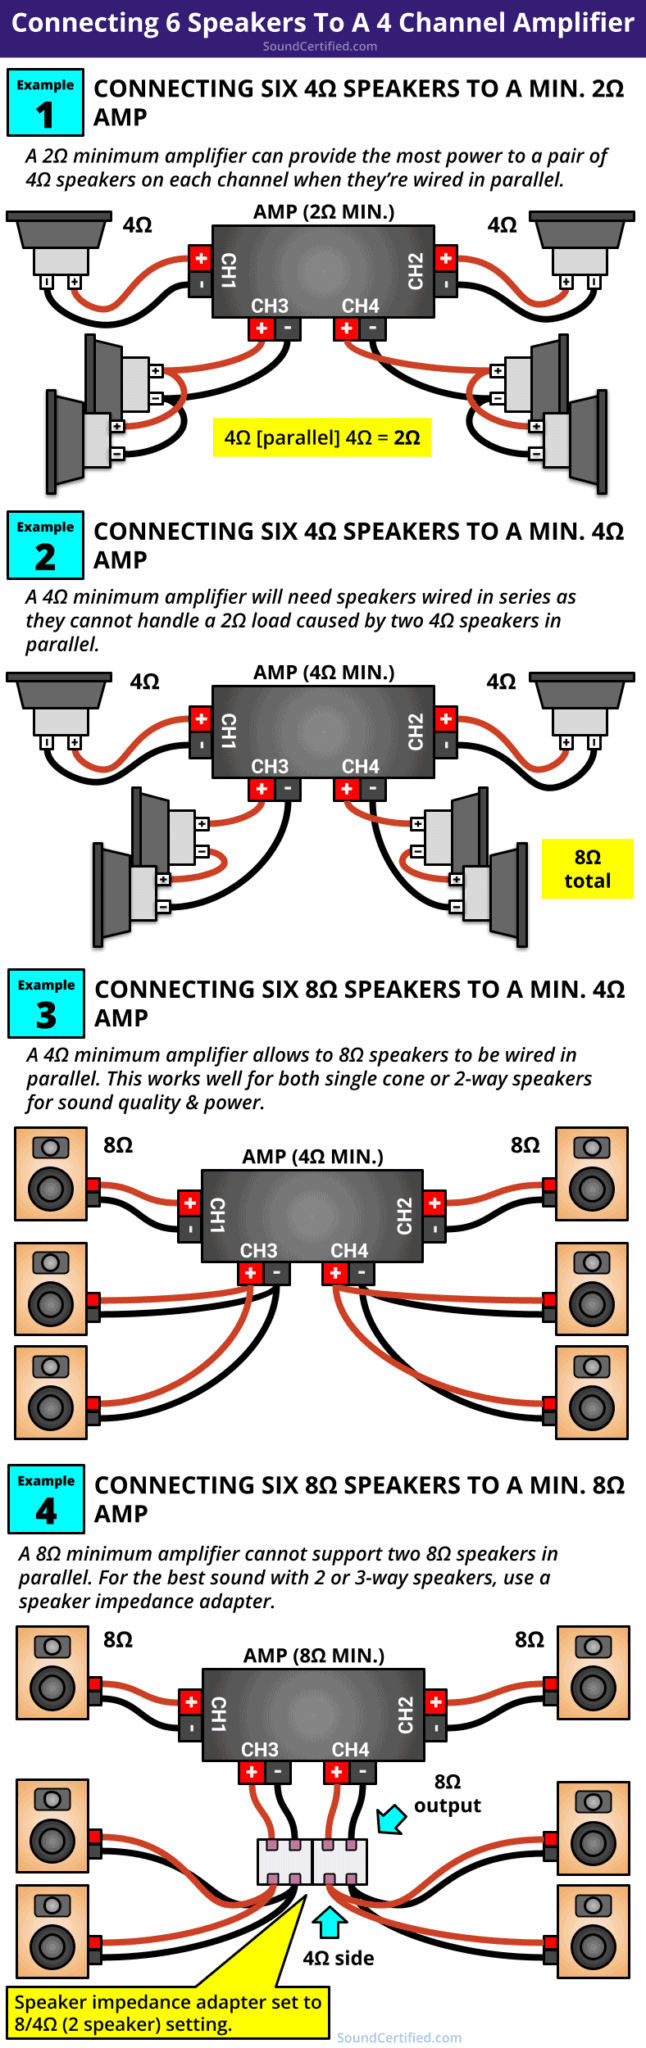 How Many Speakers Can You Use With A 4 Channel Amp?